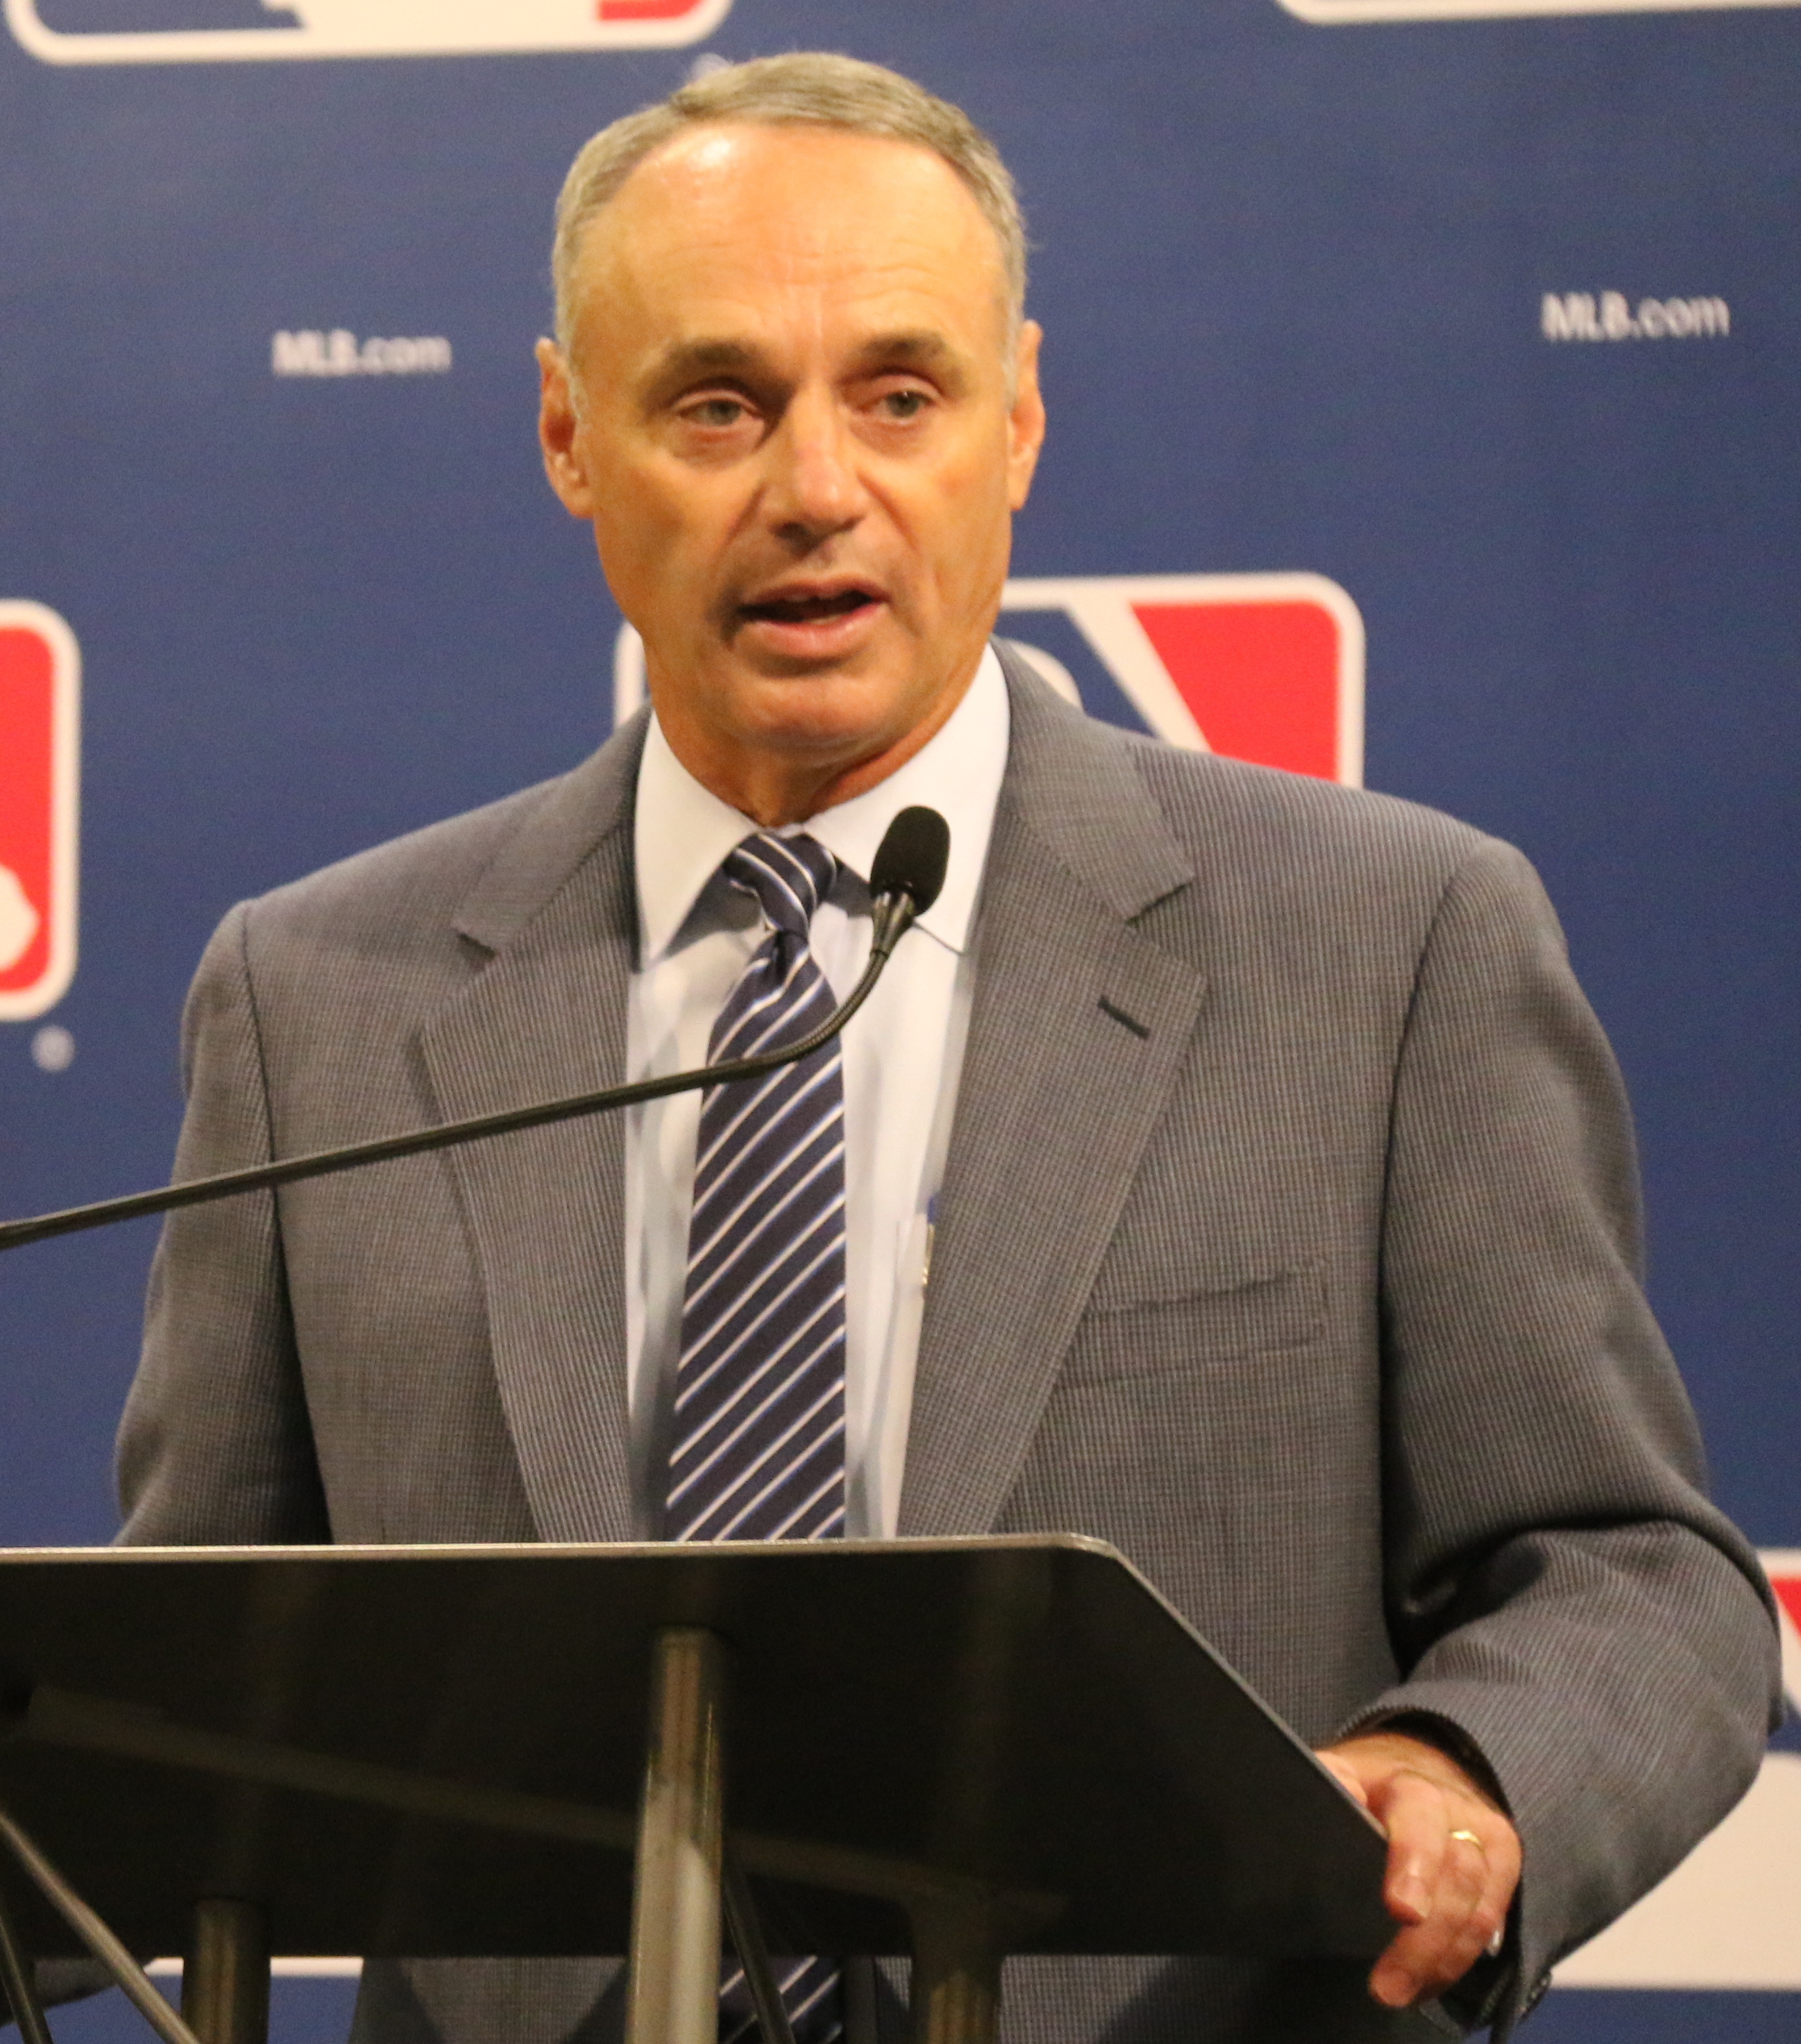 Manfred apologizes for 'piece of metal' comment